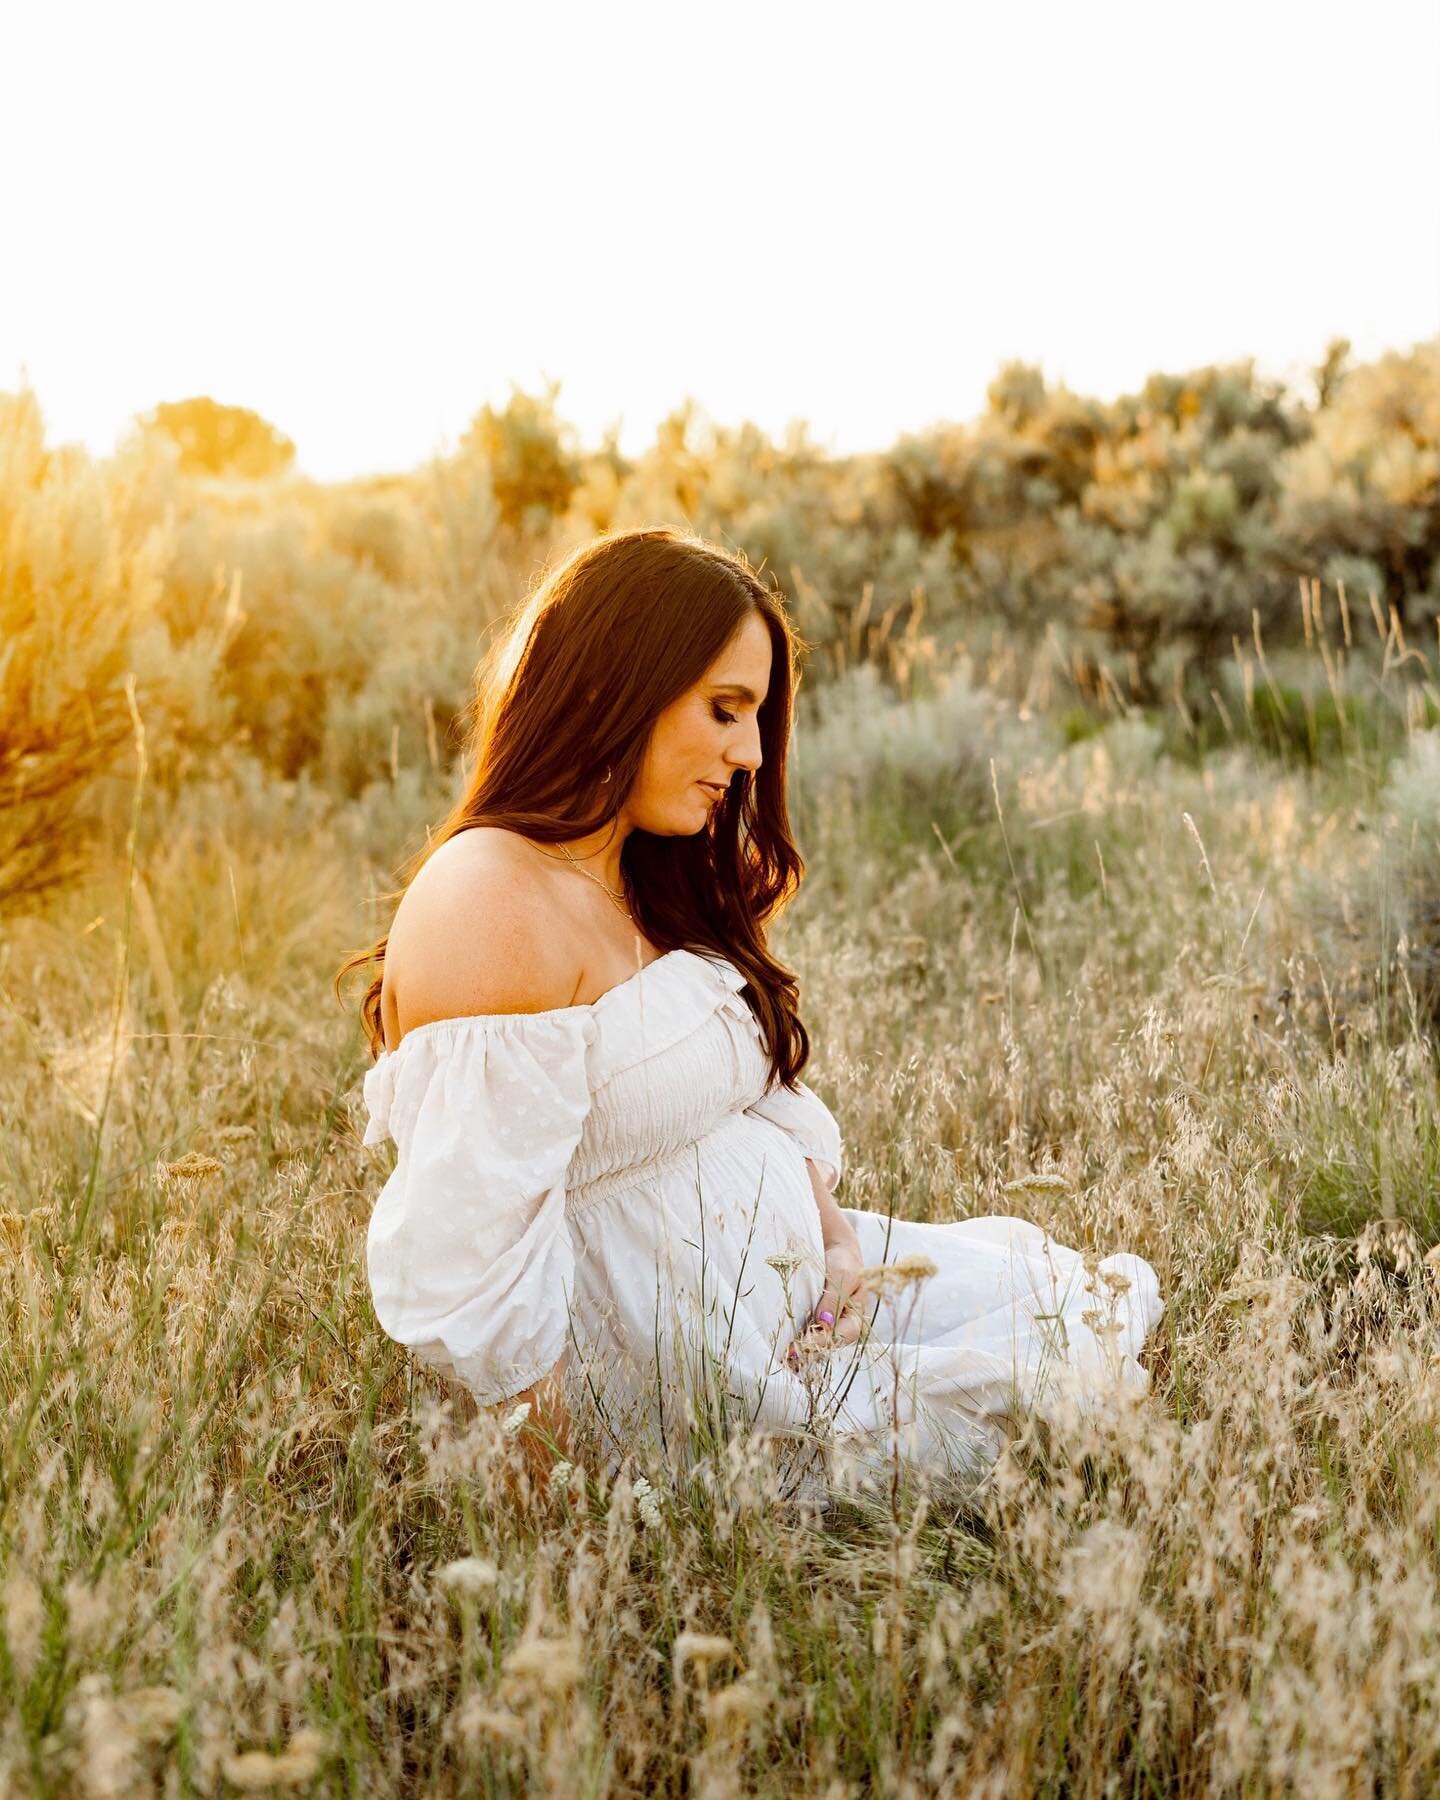 Busy week ahead of me so thought I&rsquo;d start off Monday with a post just in case I go MIA on socials for a bit.😜

Got to hangout with this sweet mama &amp; her family for a maternity/family session! We had the most beautiful sunset &amp; so many